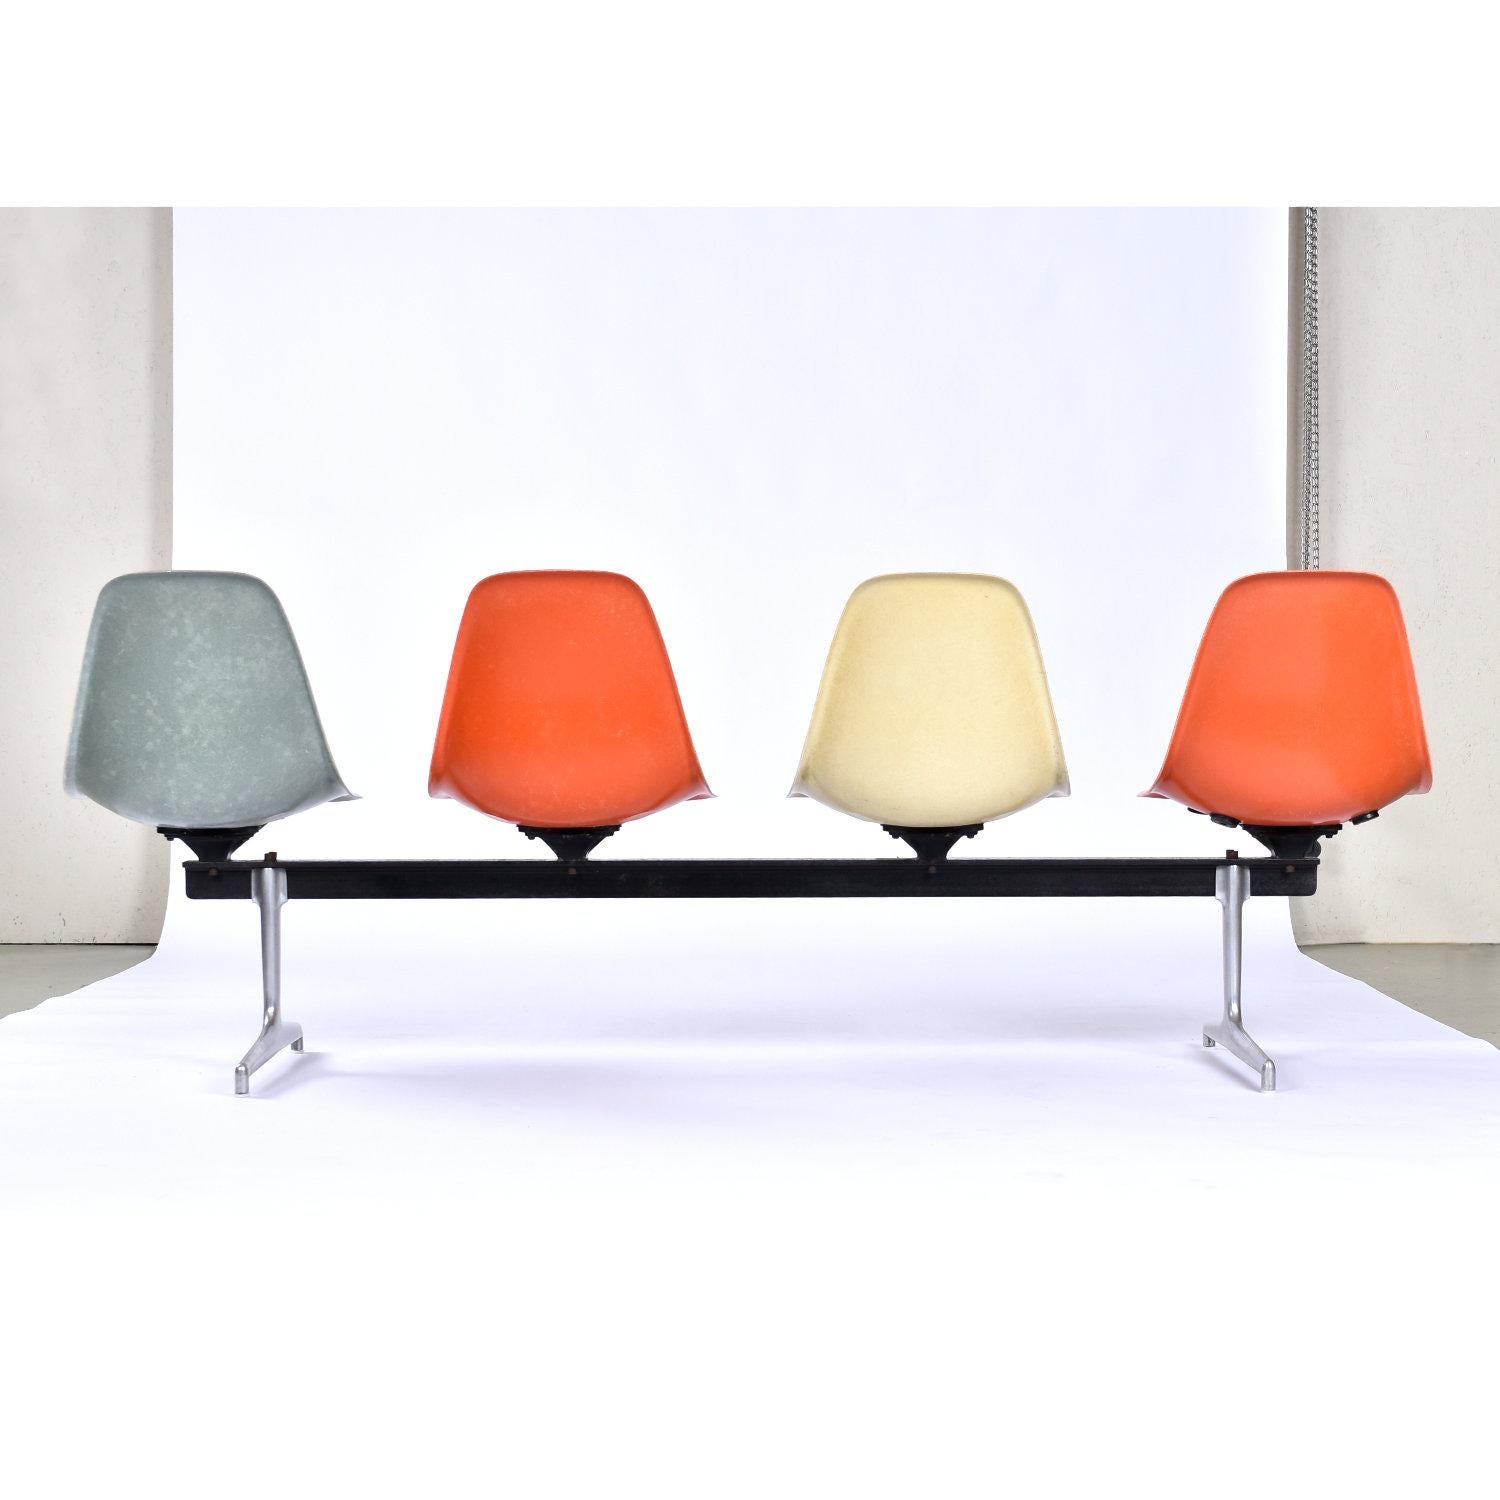 Iconic Mid-Century Modern Charles and Ray Eames for Herman Miller tandem bench. This modular system features four Eames shell chairs. I must say, this color way is particularly exciting. We love the playful orange, parchment, and light blue